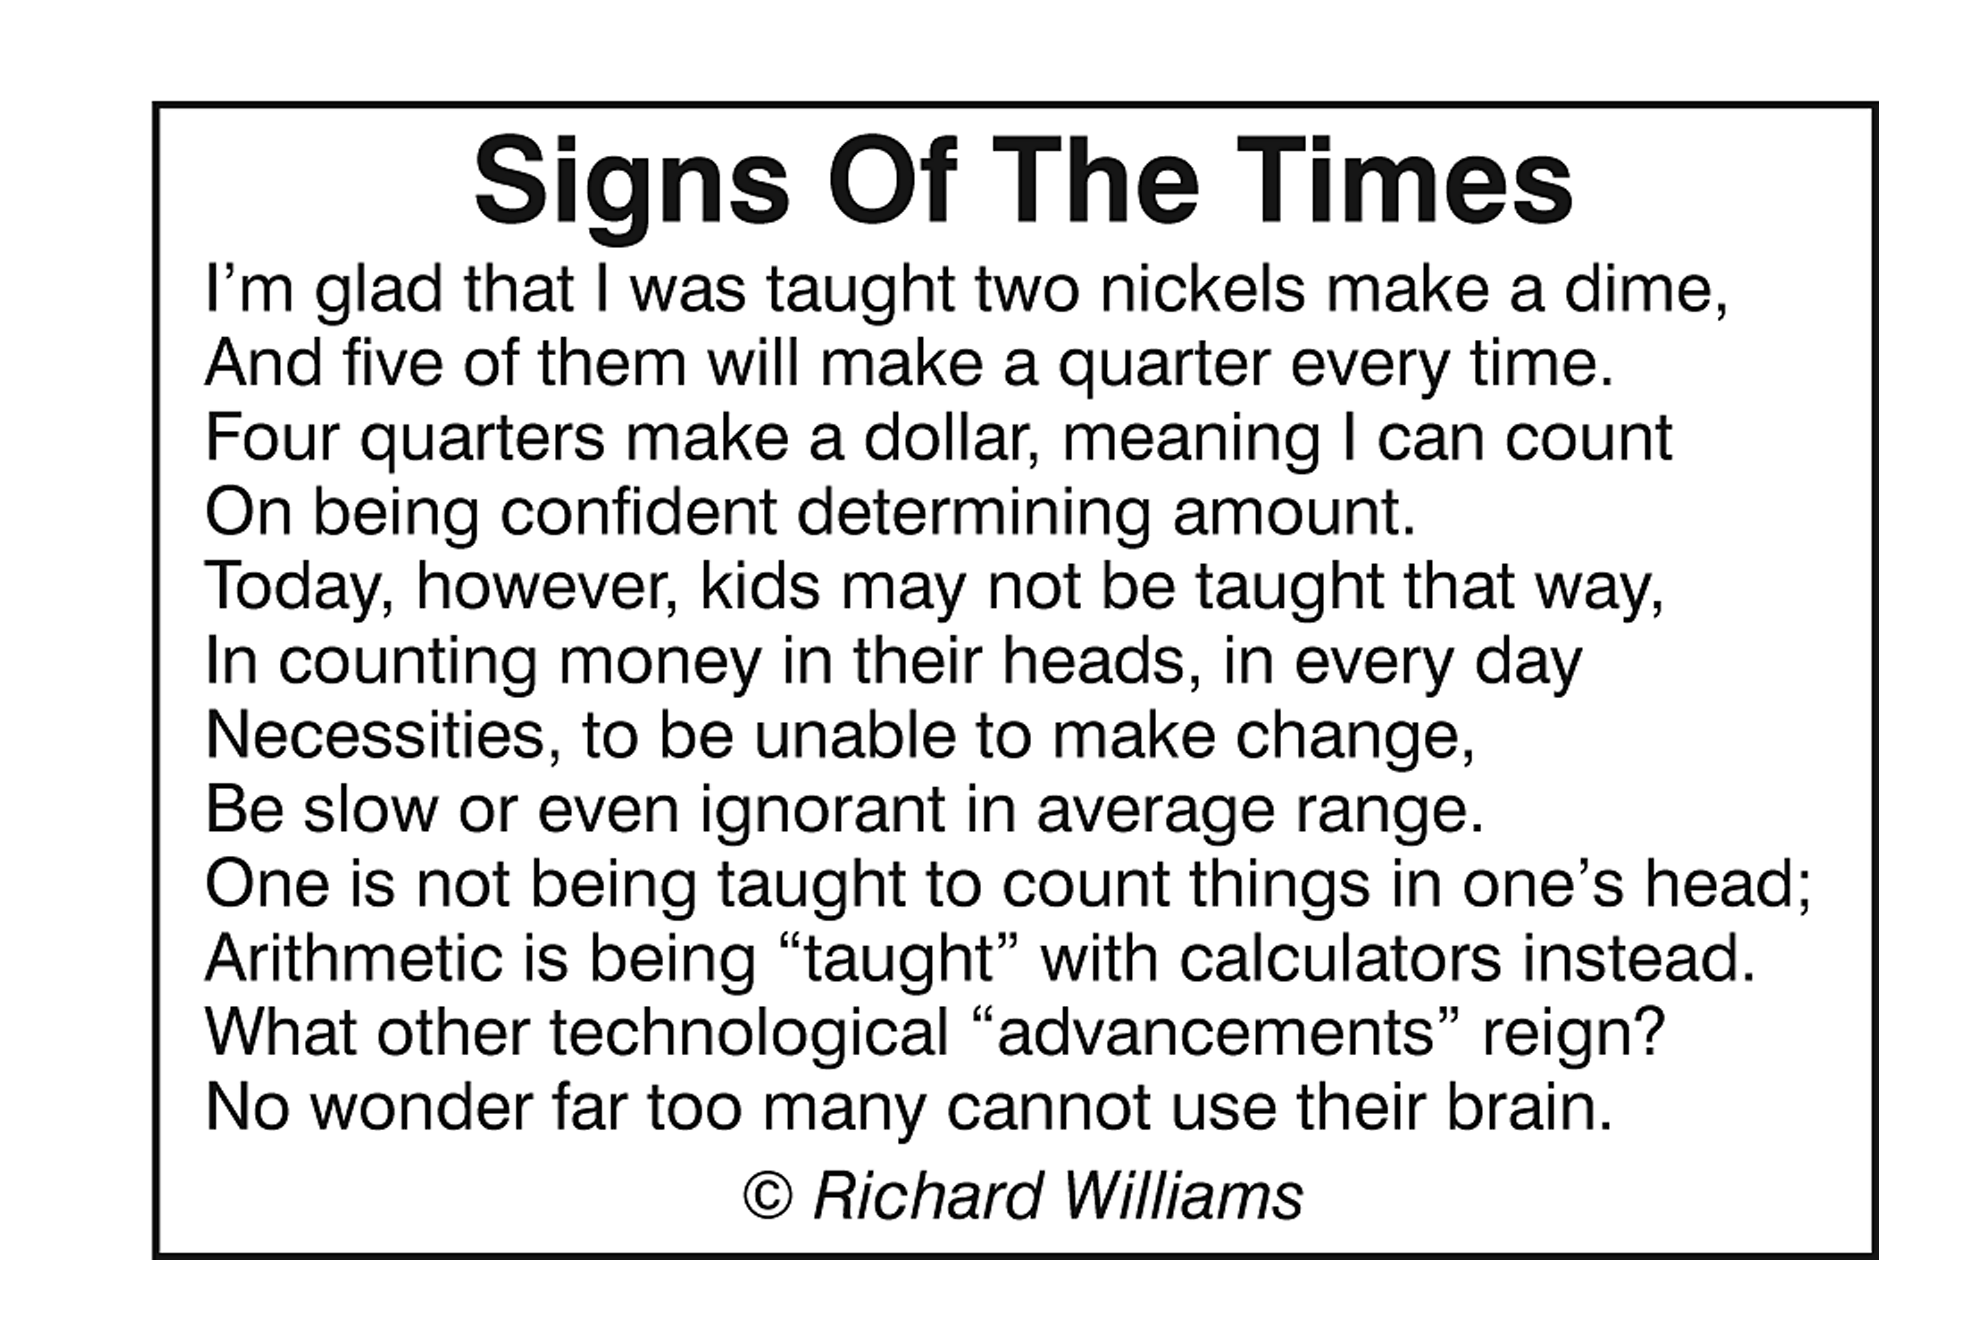 Richard Williams Poem Sign of the Times